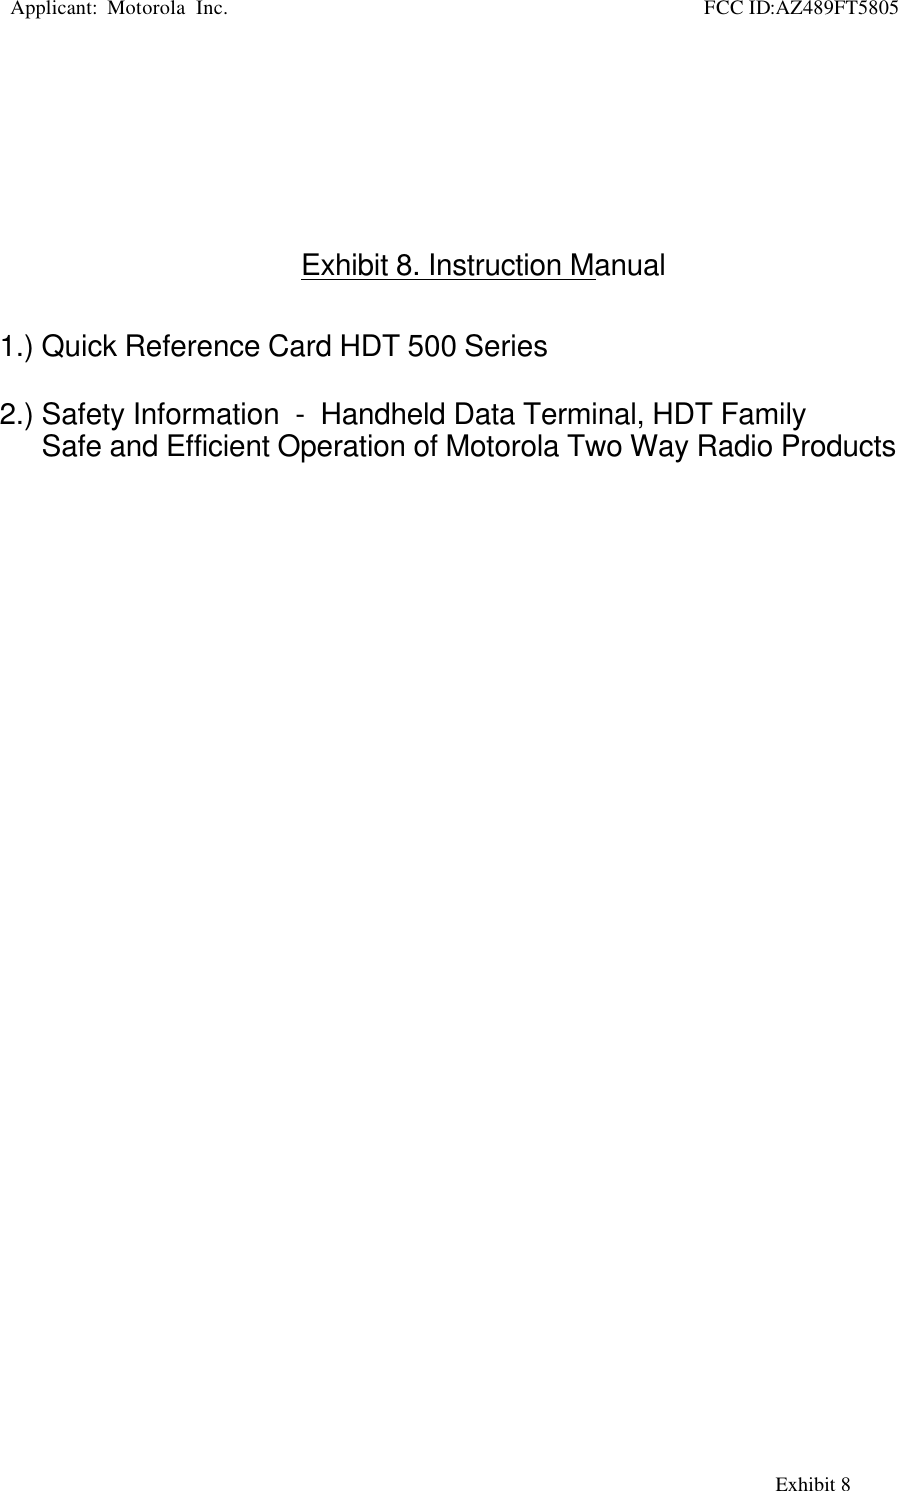   Applicant:  Motorola  Inc.                                                     FCC ID:AZ489FT5805                                                                                                                                                     Exhibit 8Exhibit 8. Instruction Manual1.) Quick Reference Card HDT 500 Series2.) Safety Information  -  Handheld Data Terminal, HDT FamilySafe and Efficient Operation of Motorola Two Way Radio Products